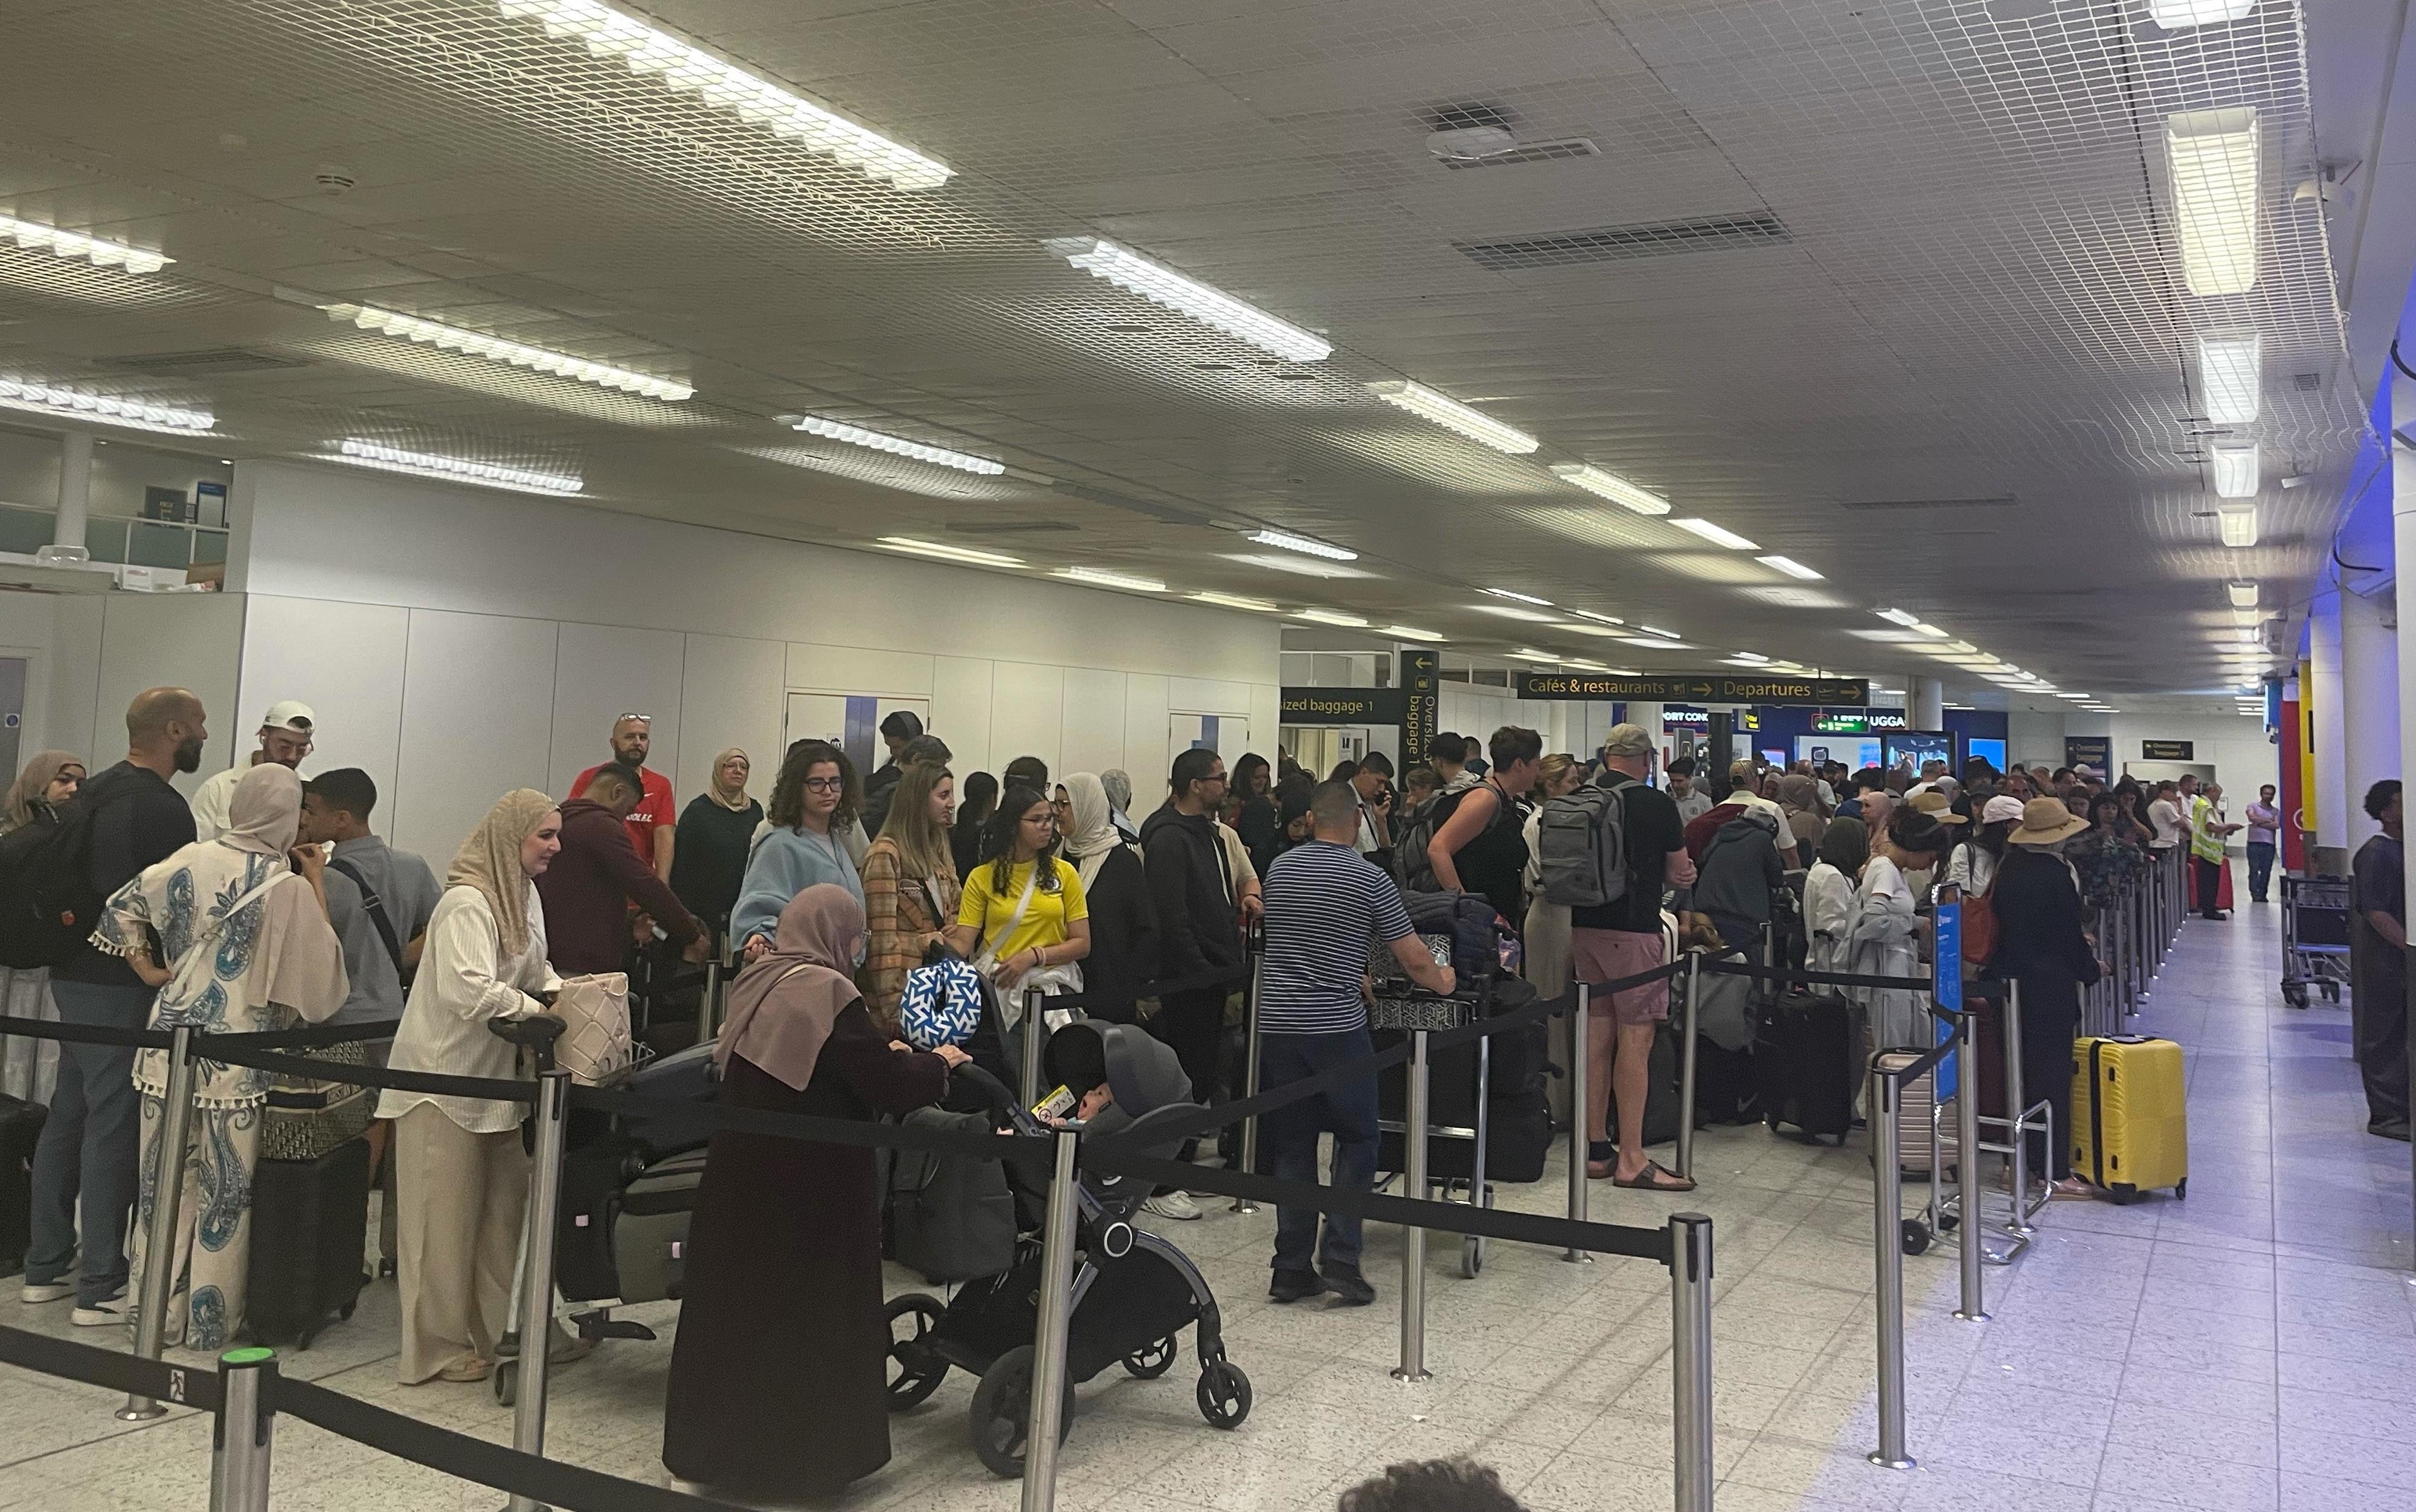 Passengers at Gatwick Airport as airlines continue to deal with the fallout from the global IT outage